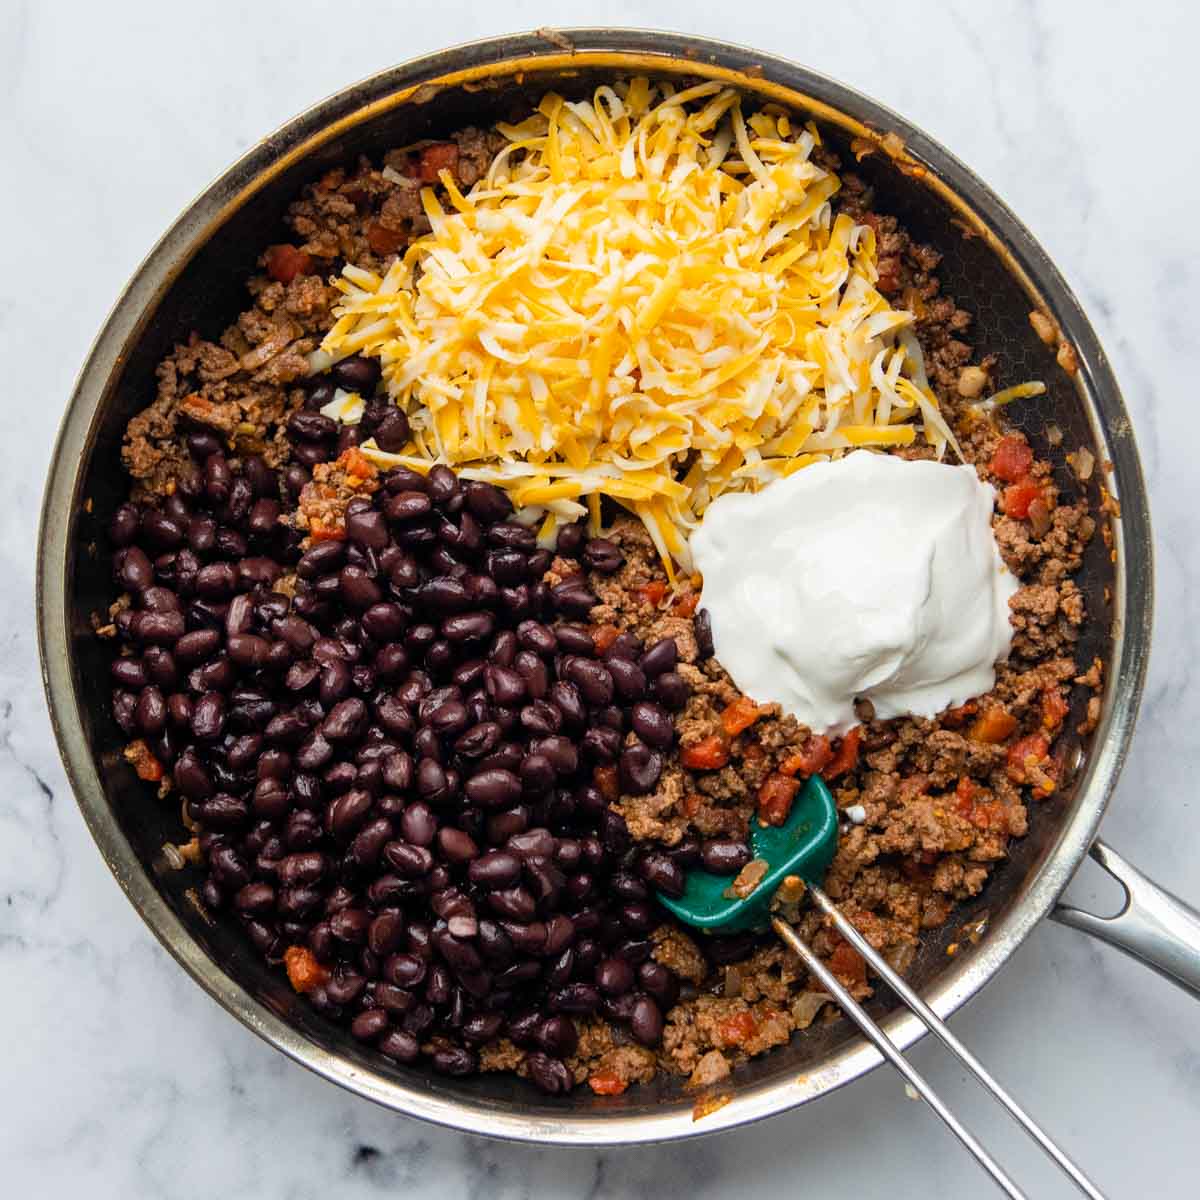 beans, cheese, and sour cream added to mixture.